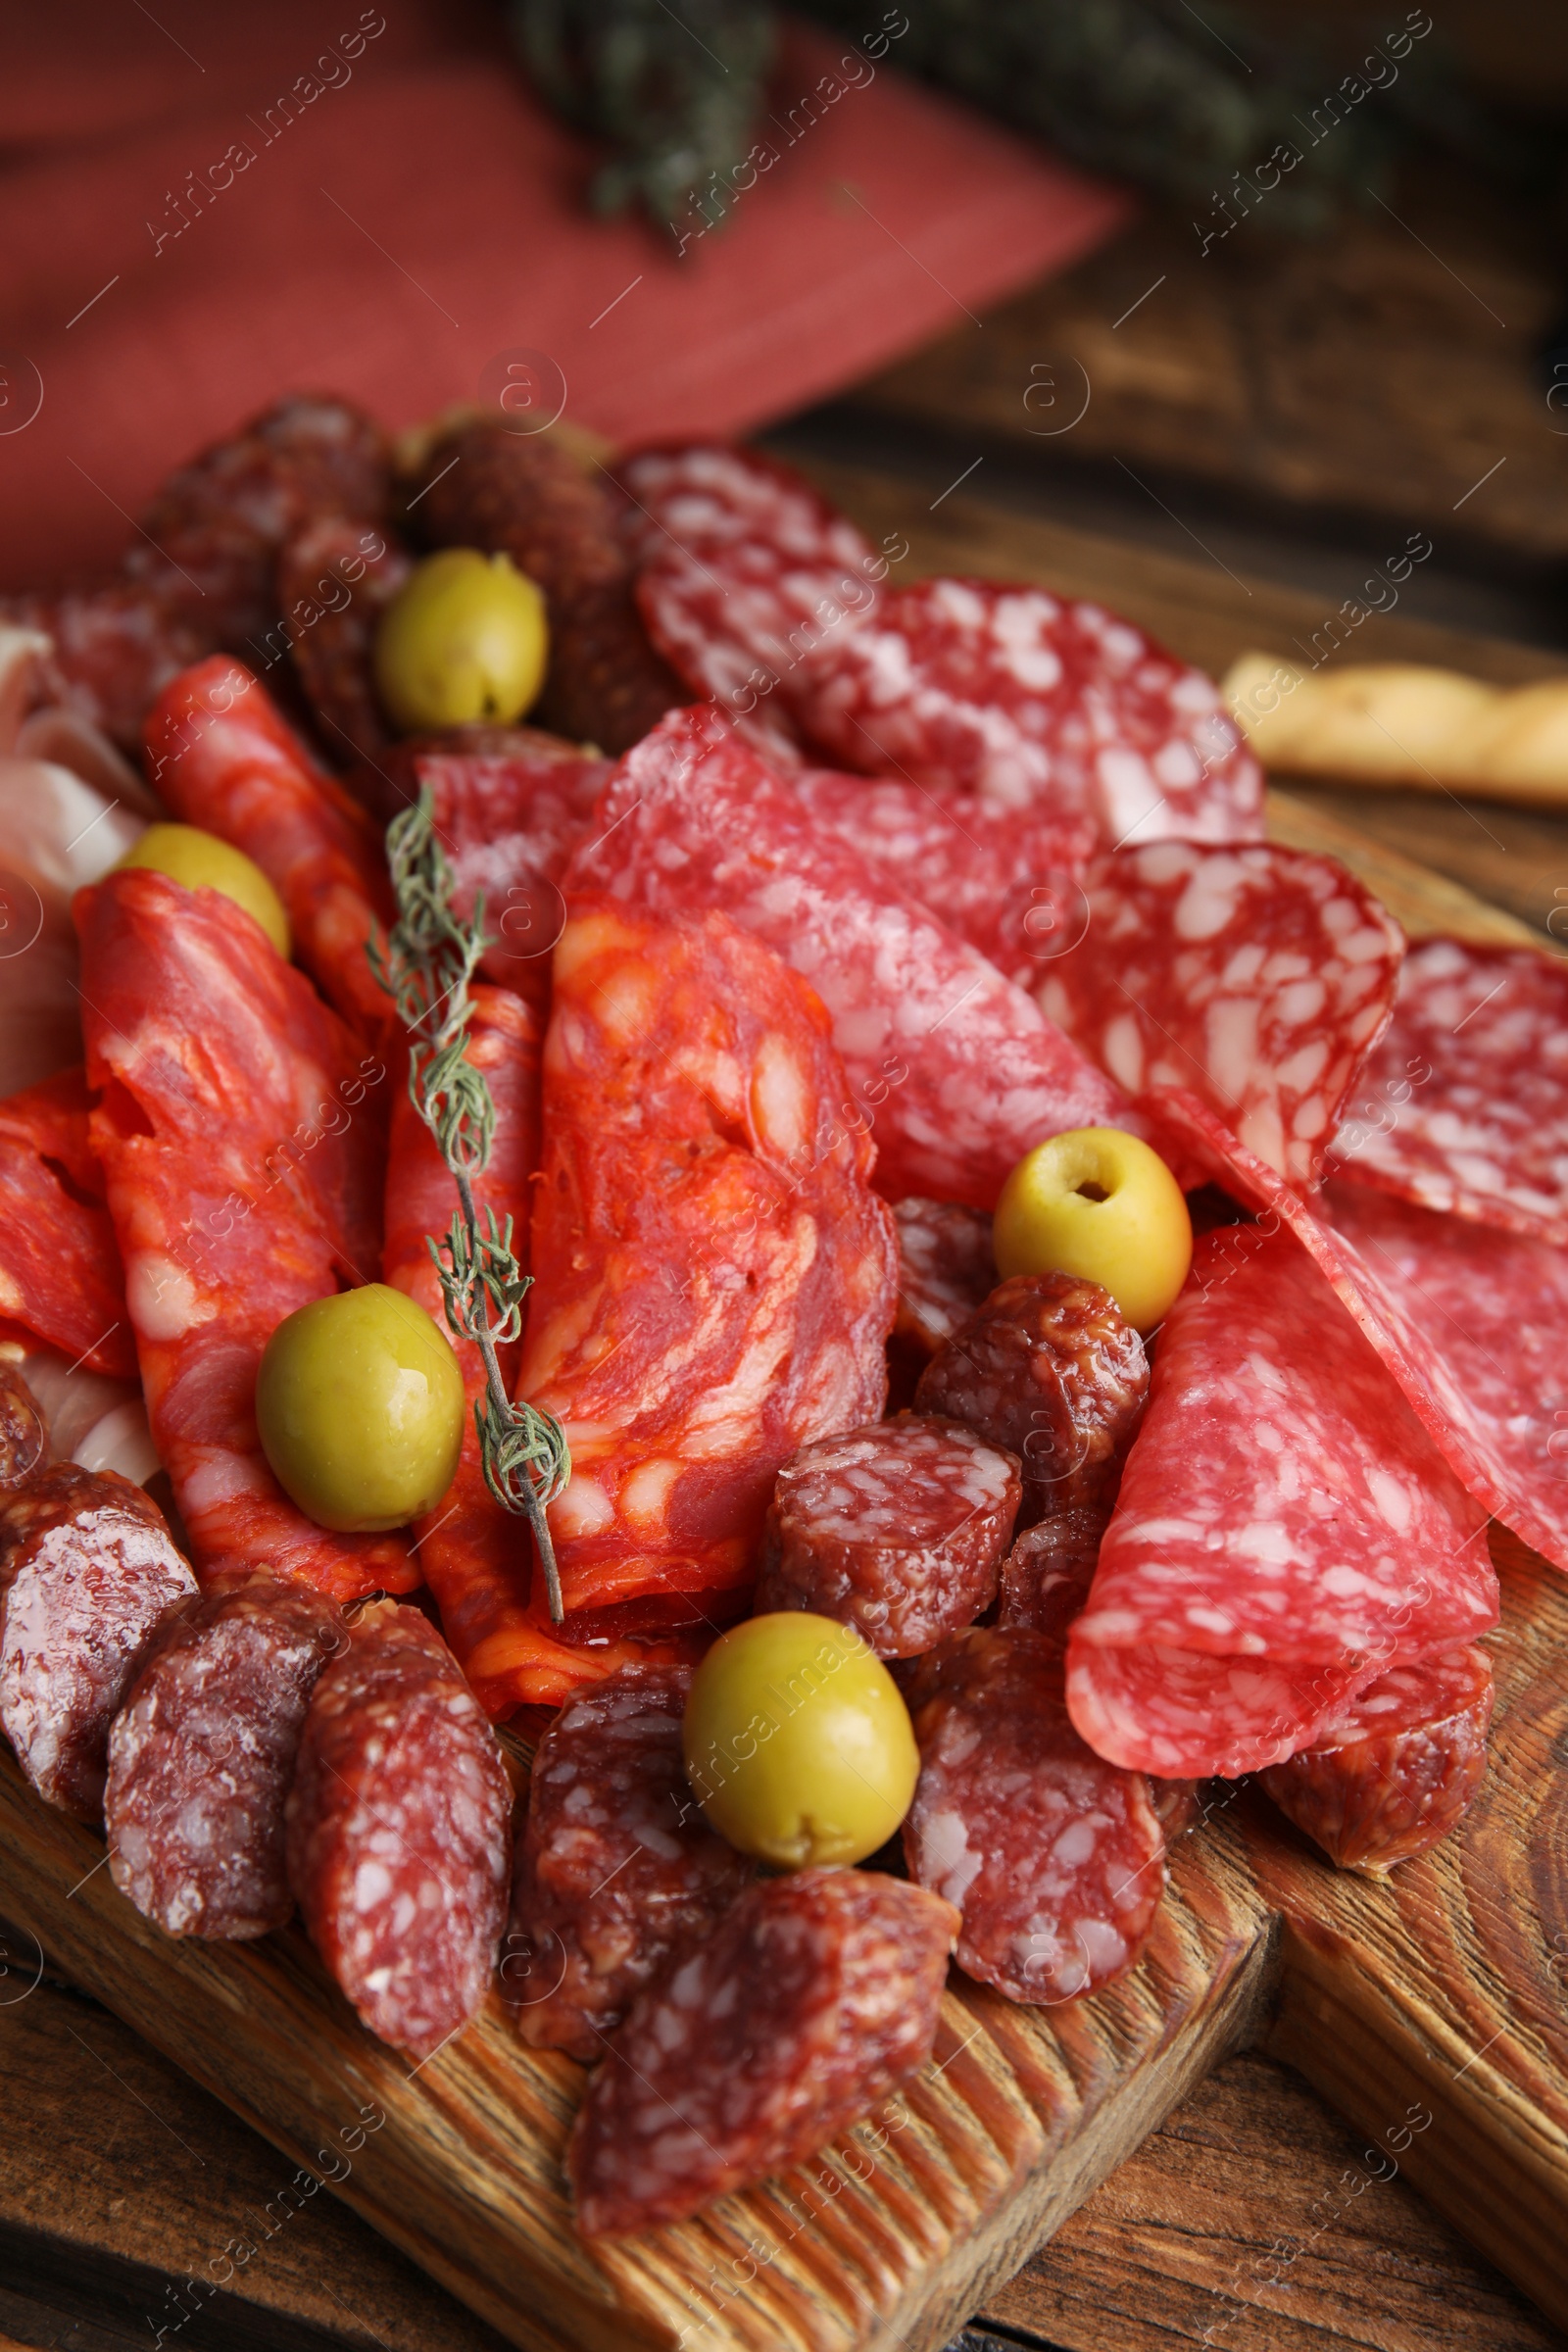 Photo of Tasty salami with other delicacies served on wooden table